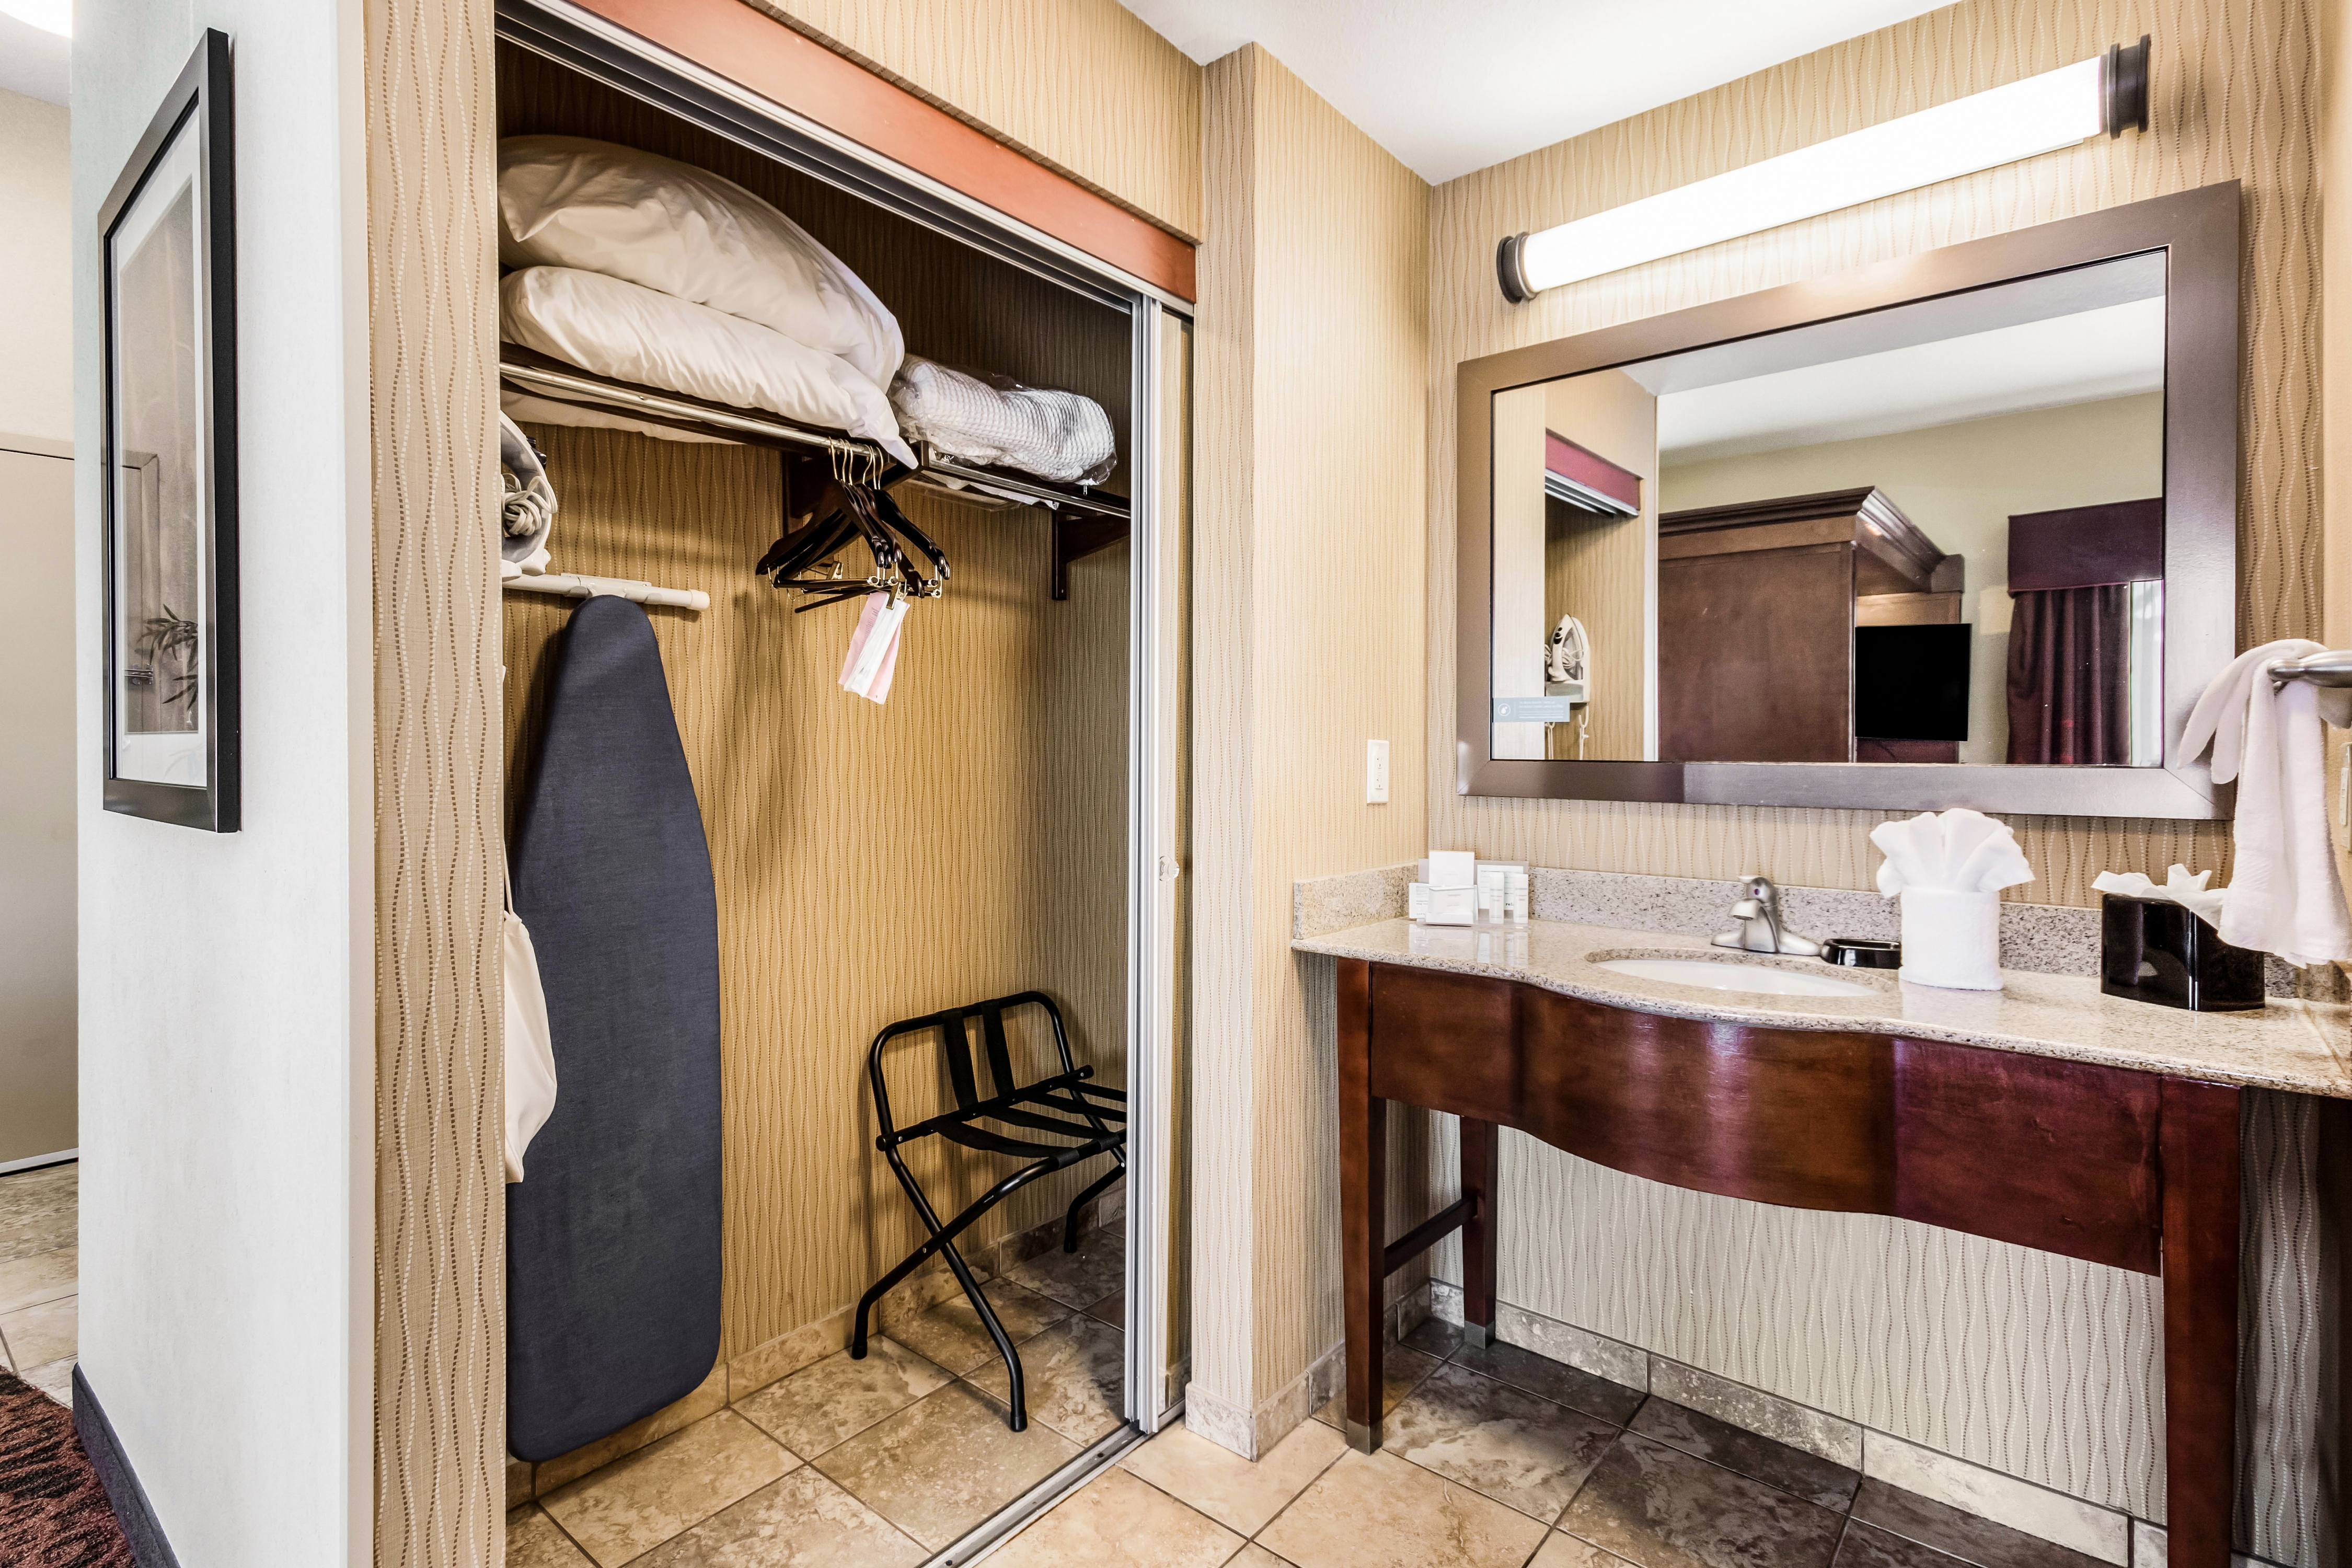 King Studio Suite With Closet And Bathroom Counter